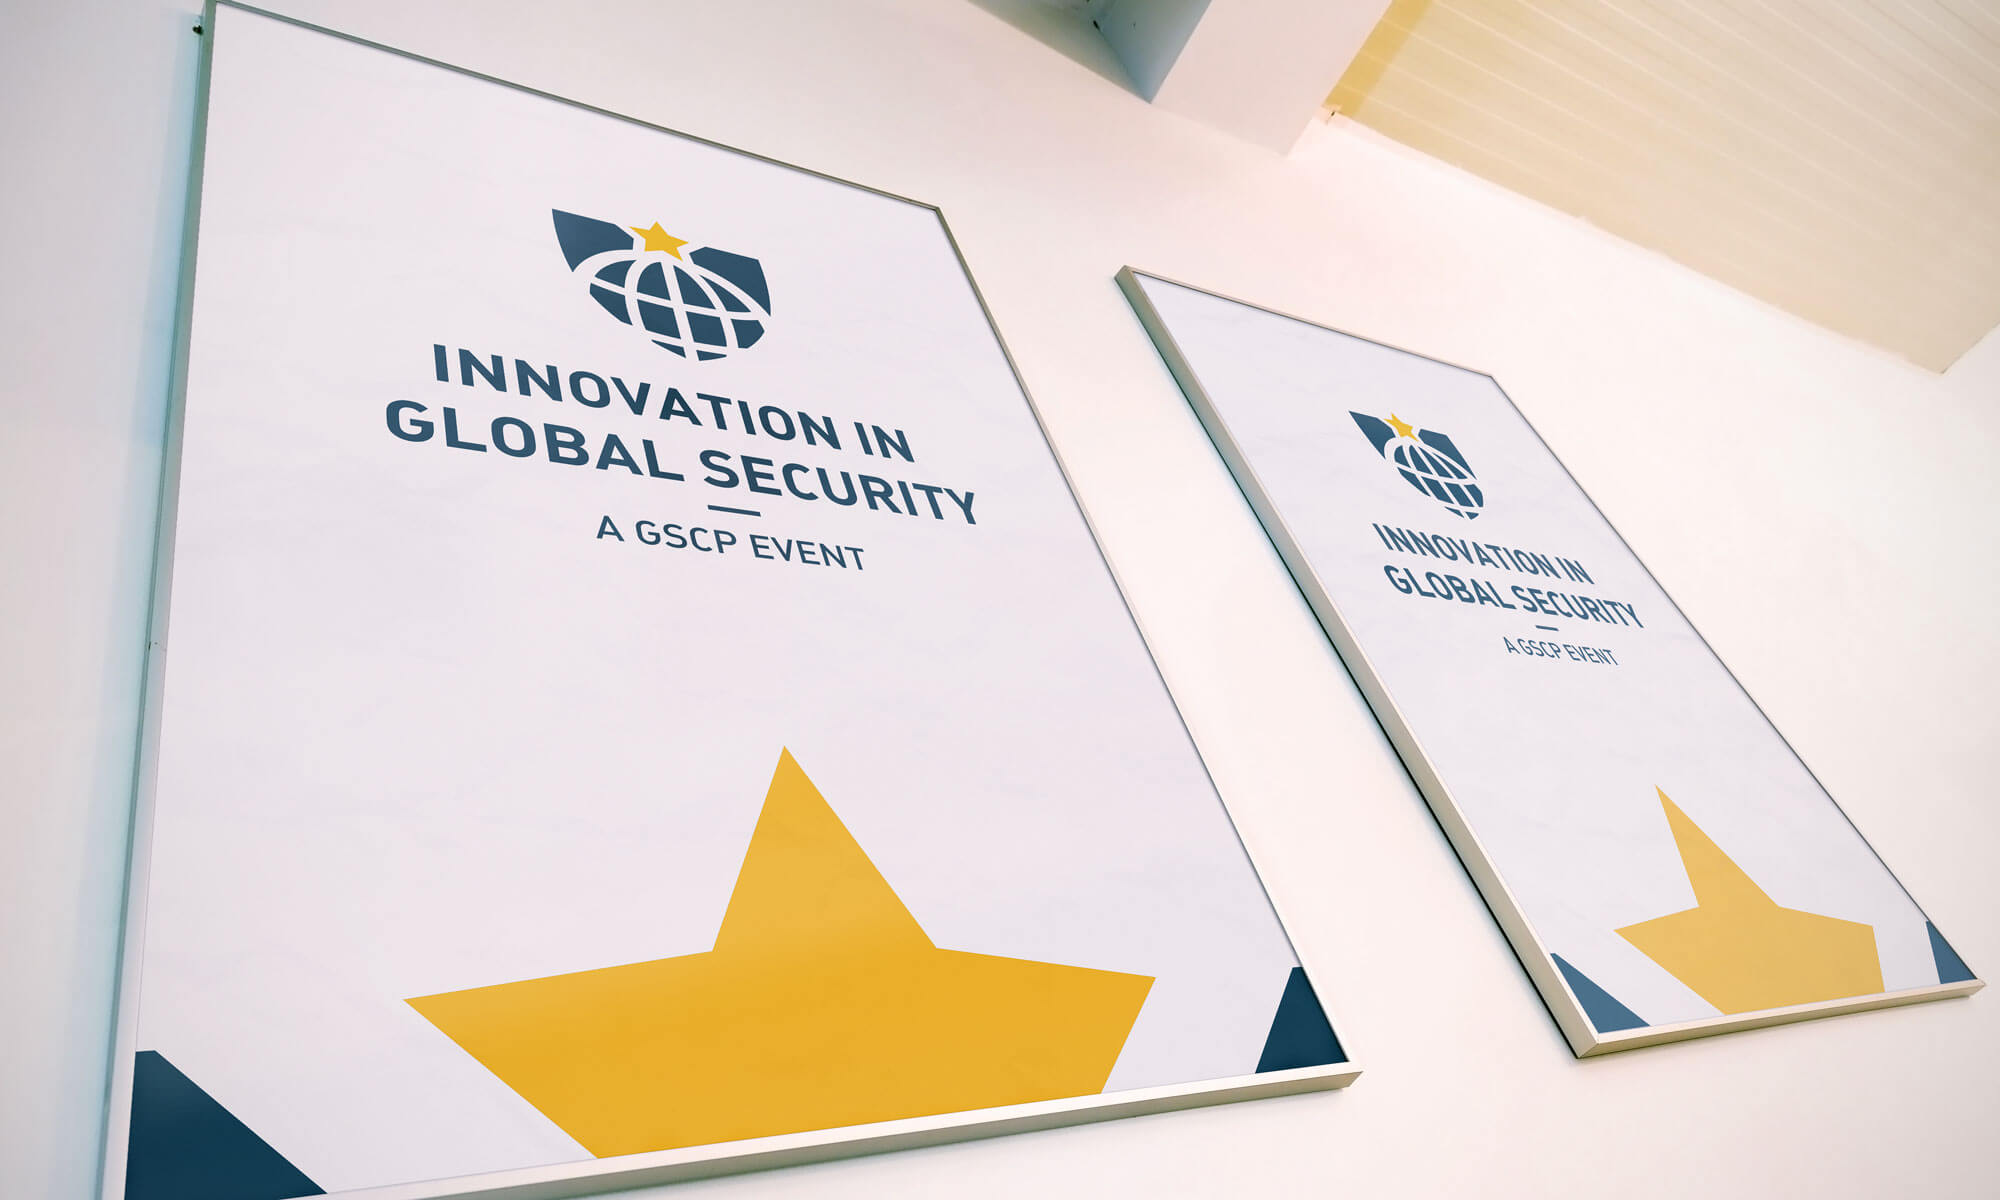 Innovation in global security logo as poster